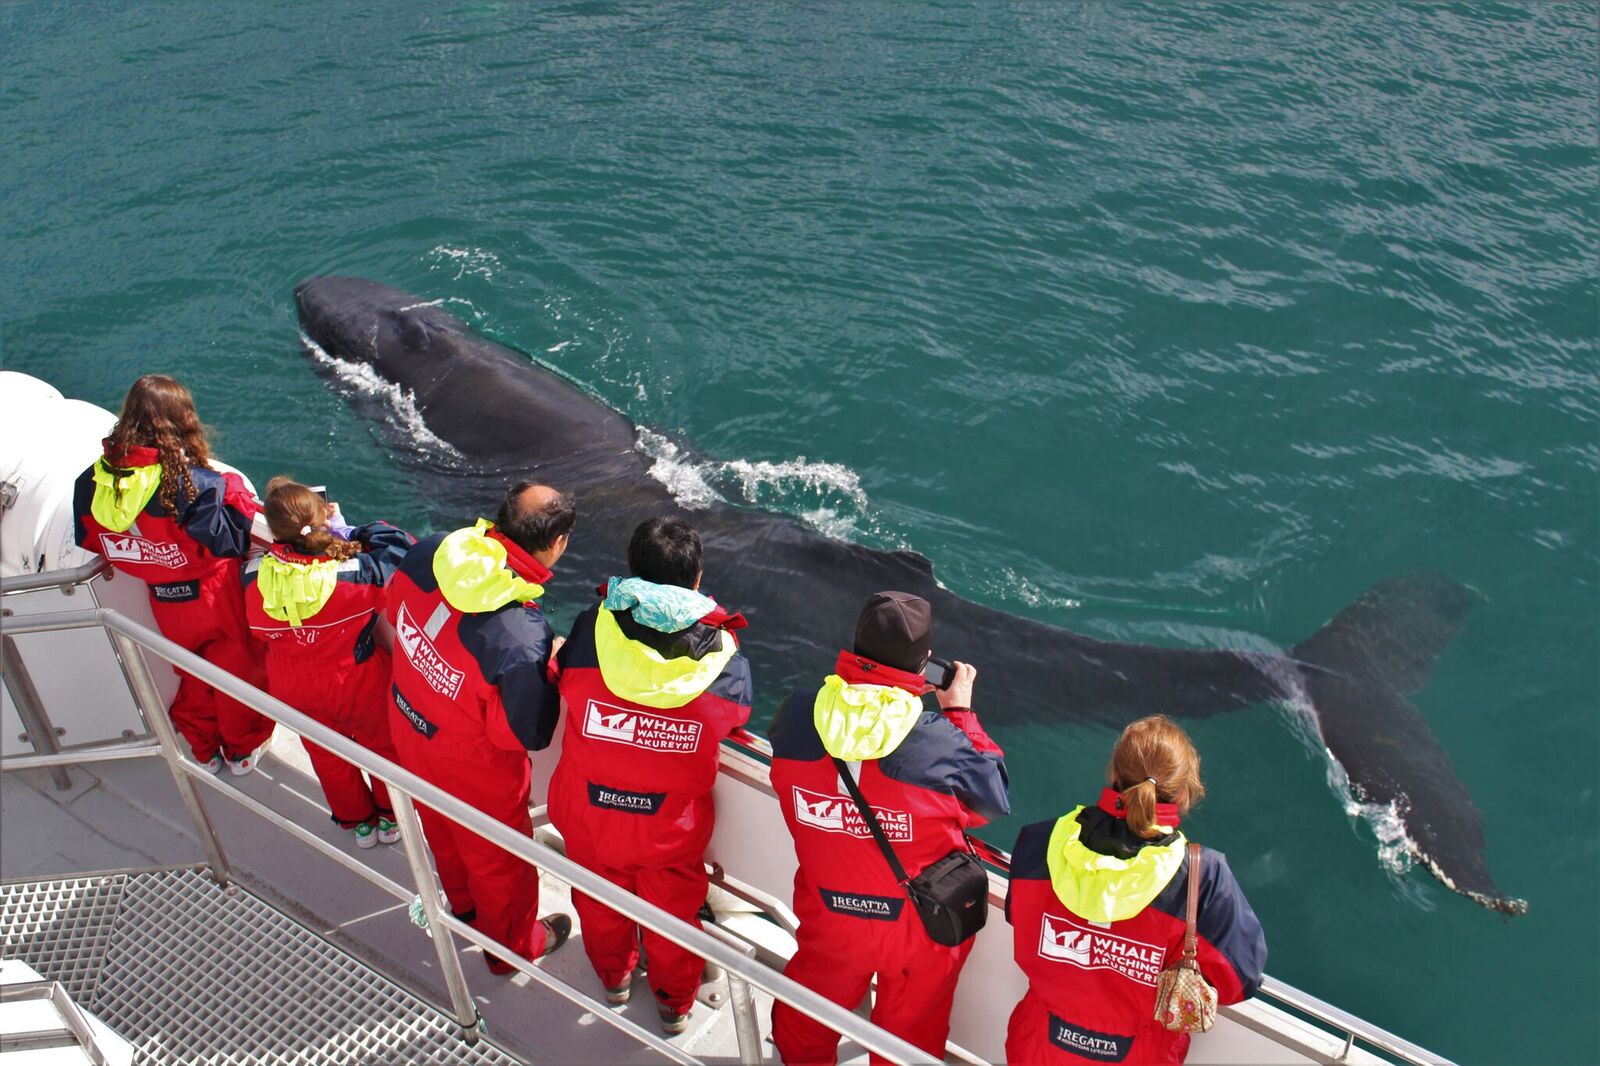 Warm overalls are provided on this Whale Watching tour from Akureyri.